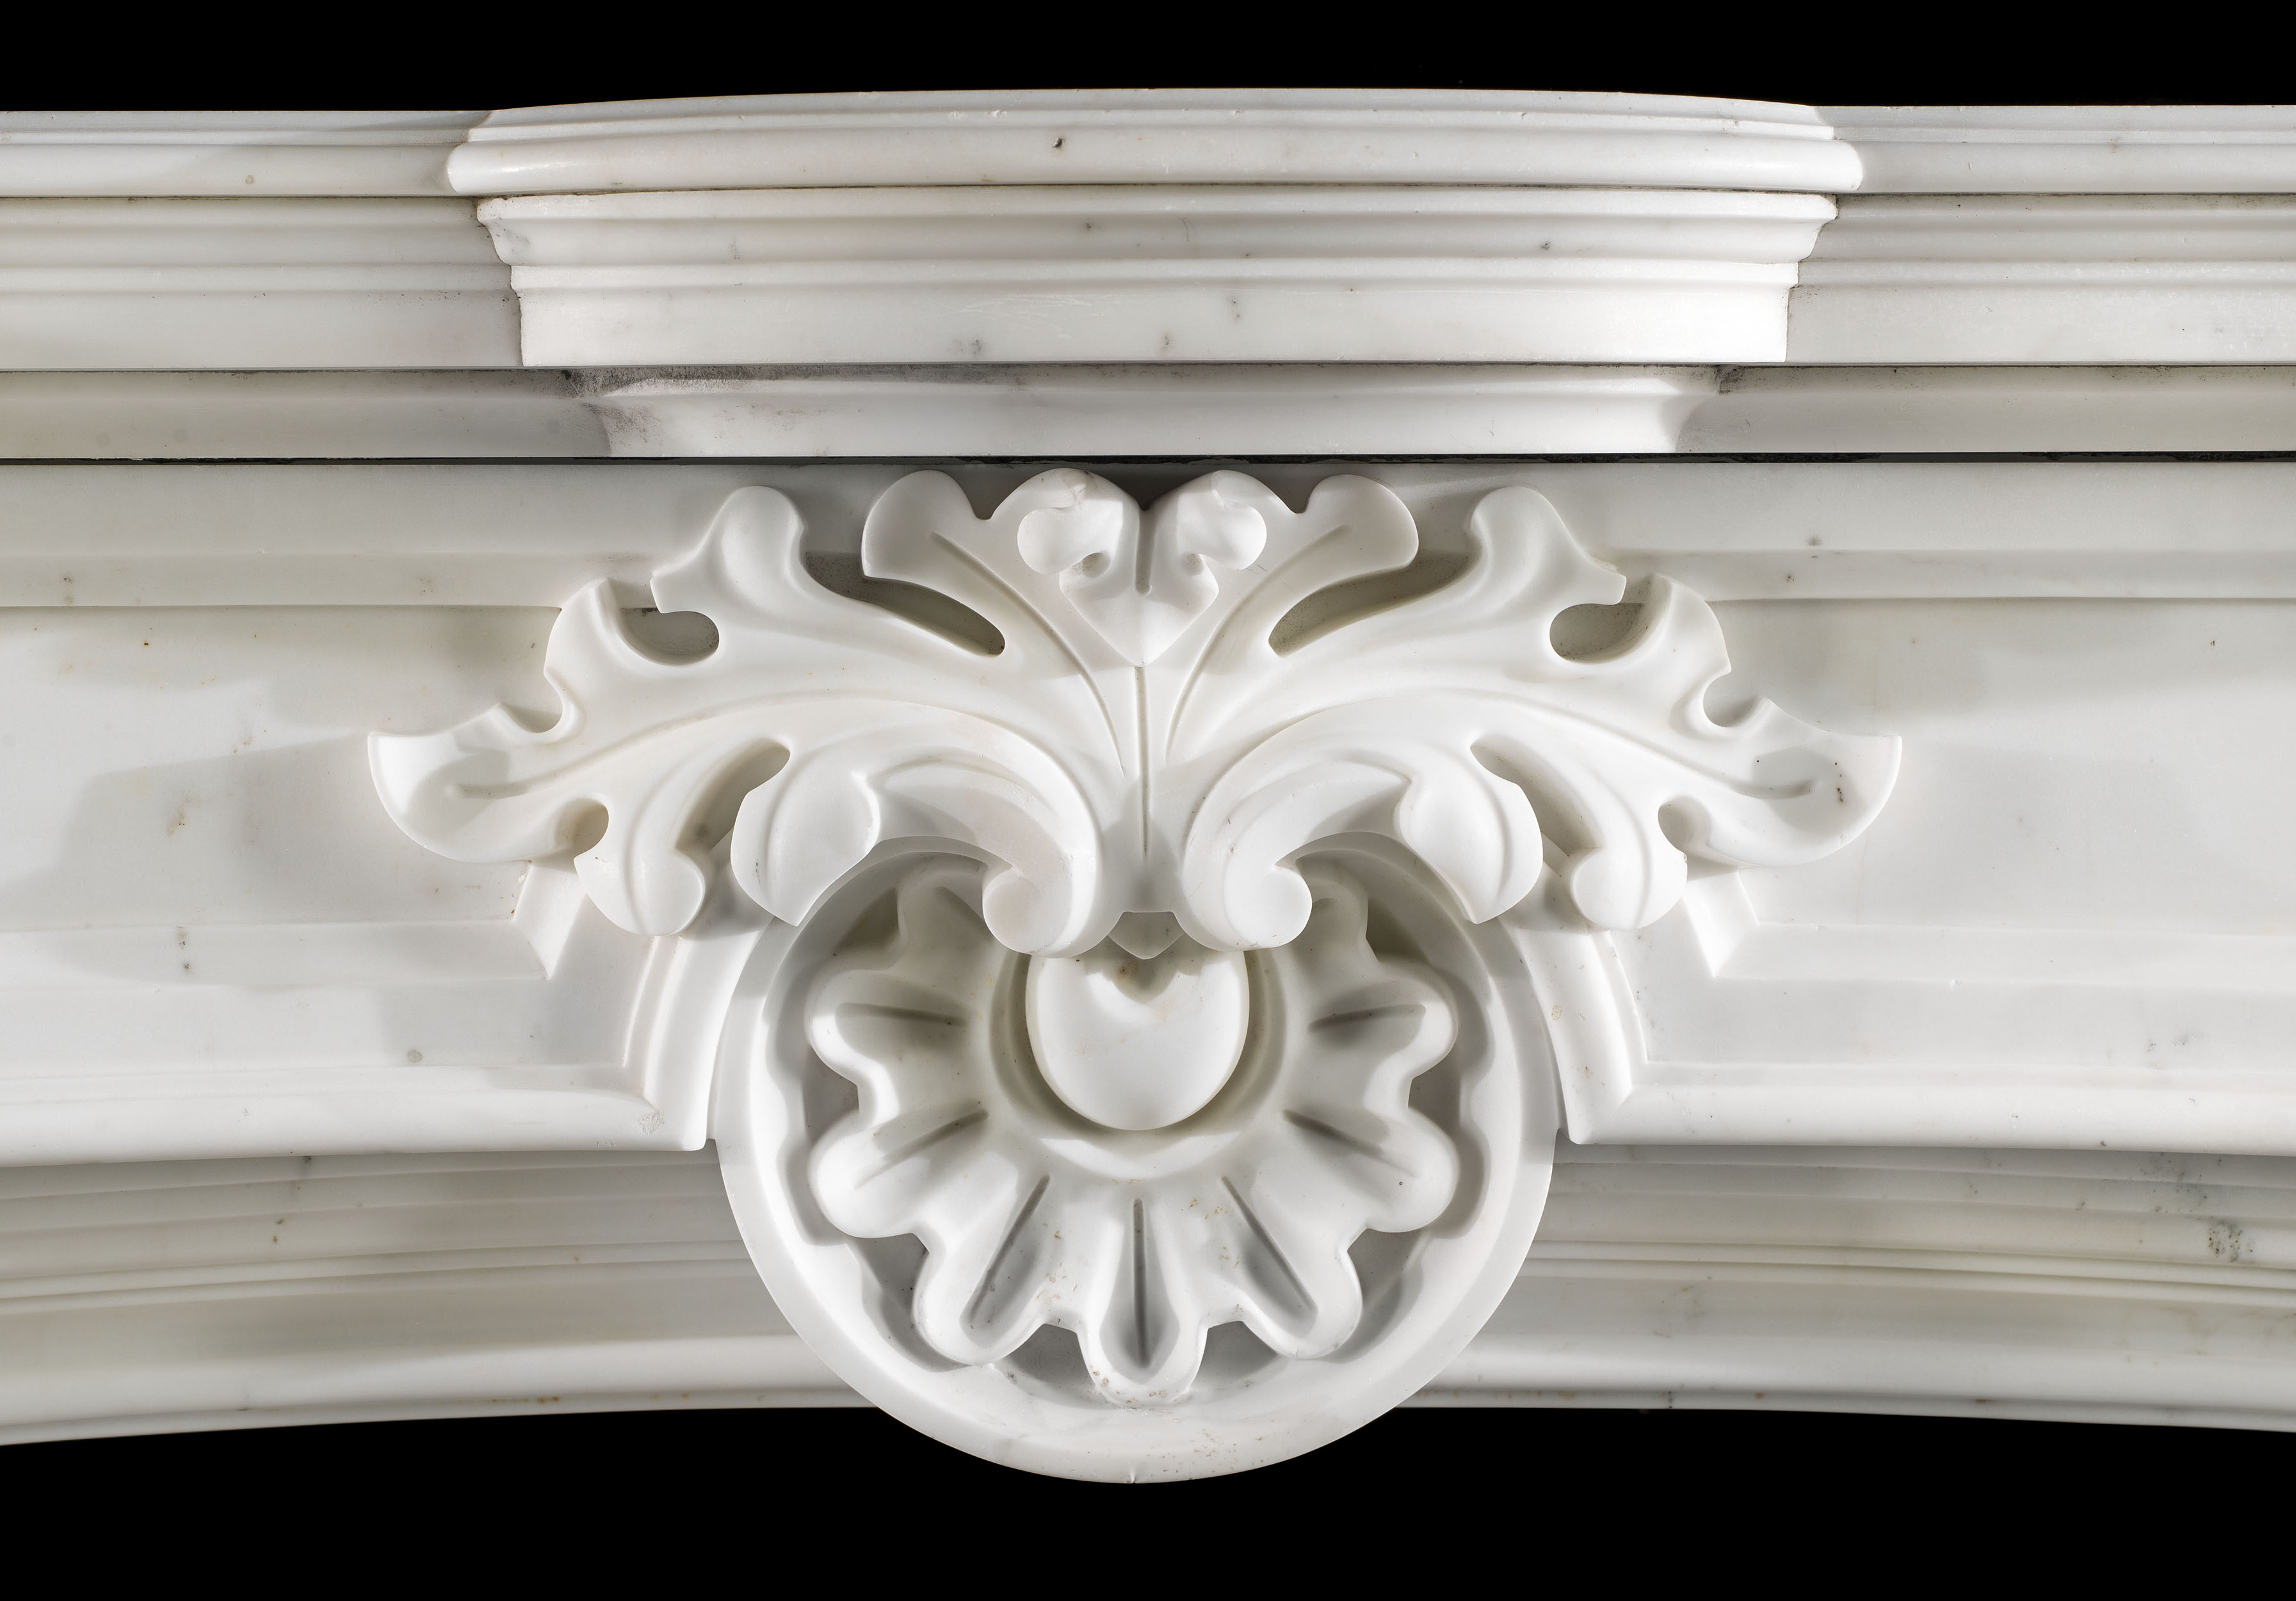 A Statuary Baroque Style Fireplace Mantel